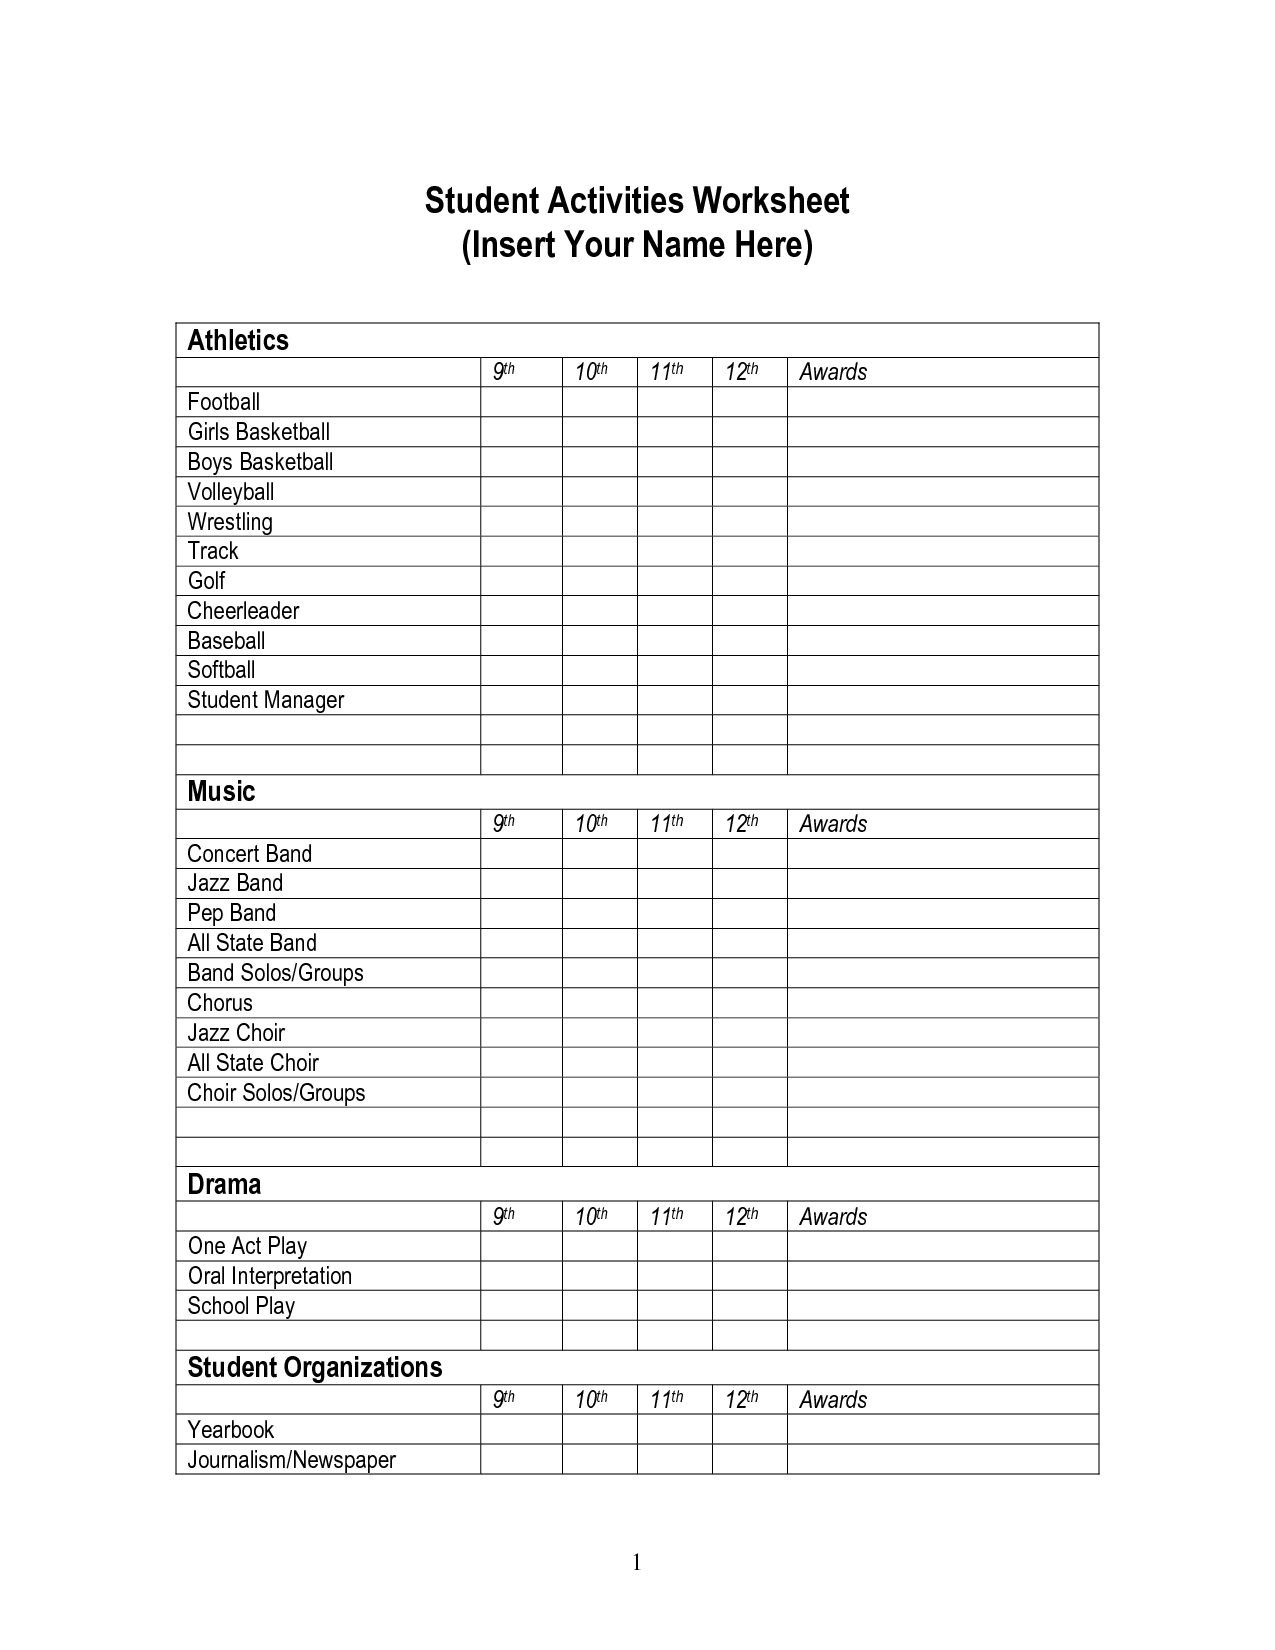 Time Zone Worksheets Students Image